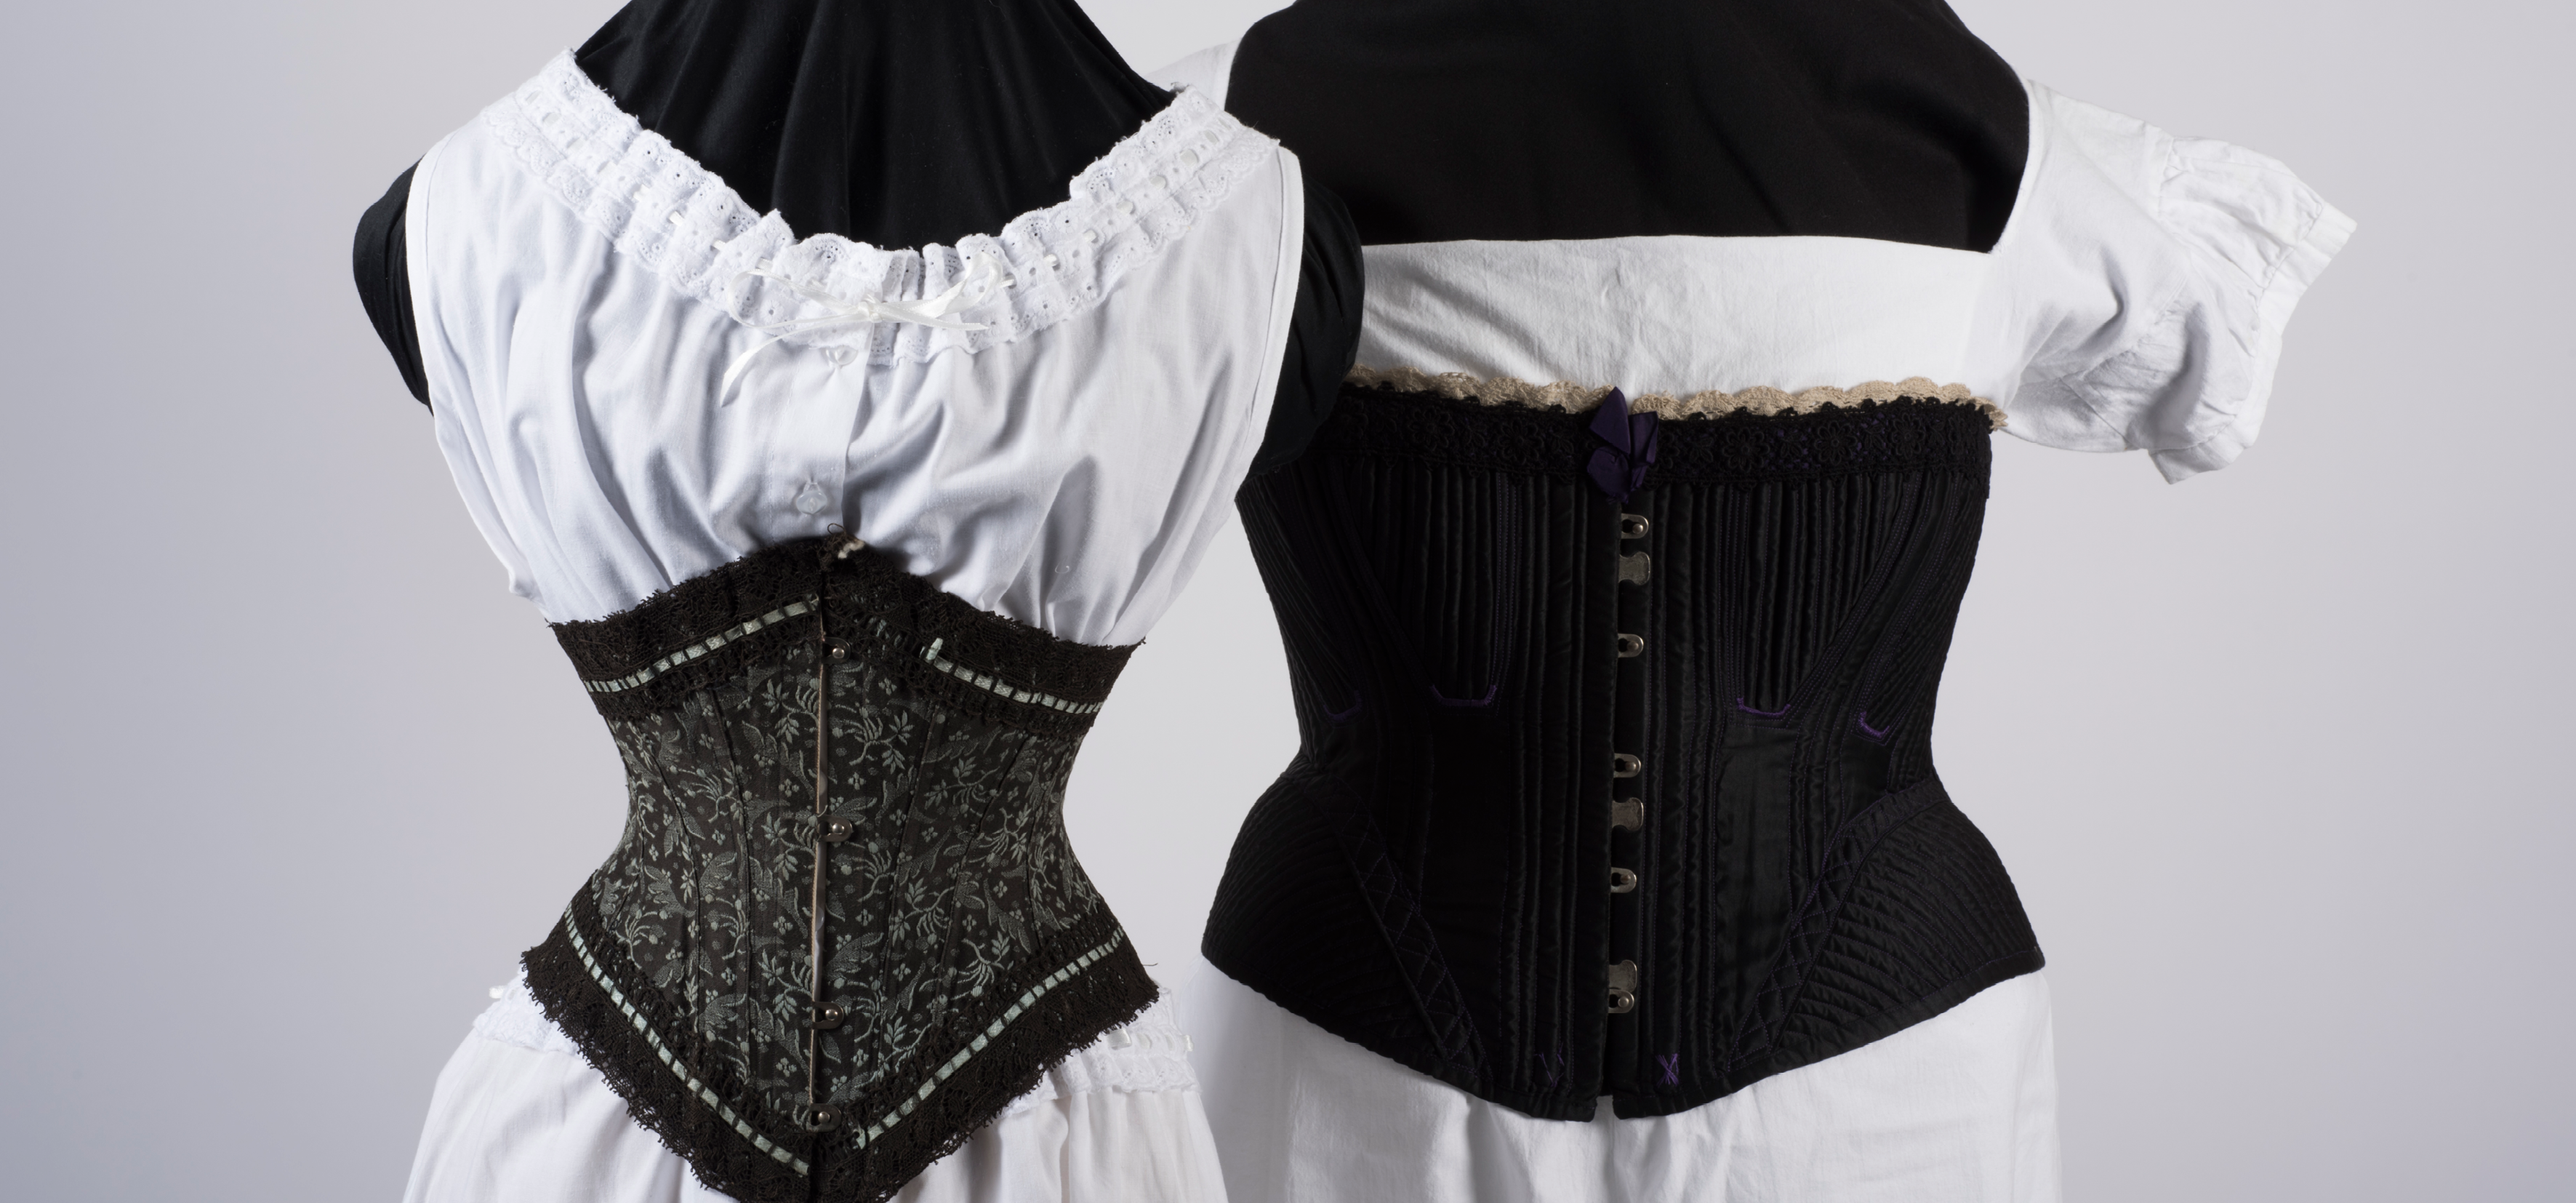 Victorian corsets: What they were like & how women used to wear